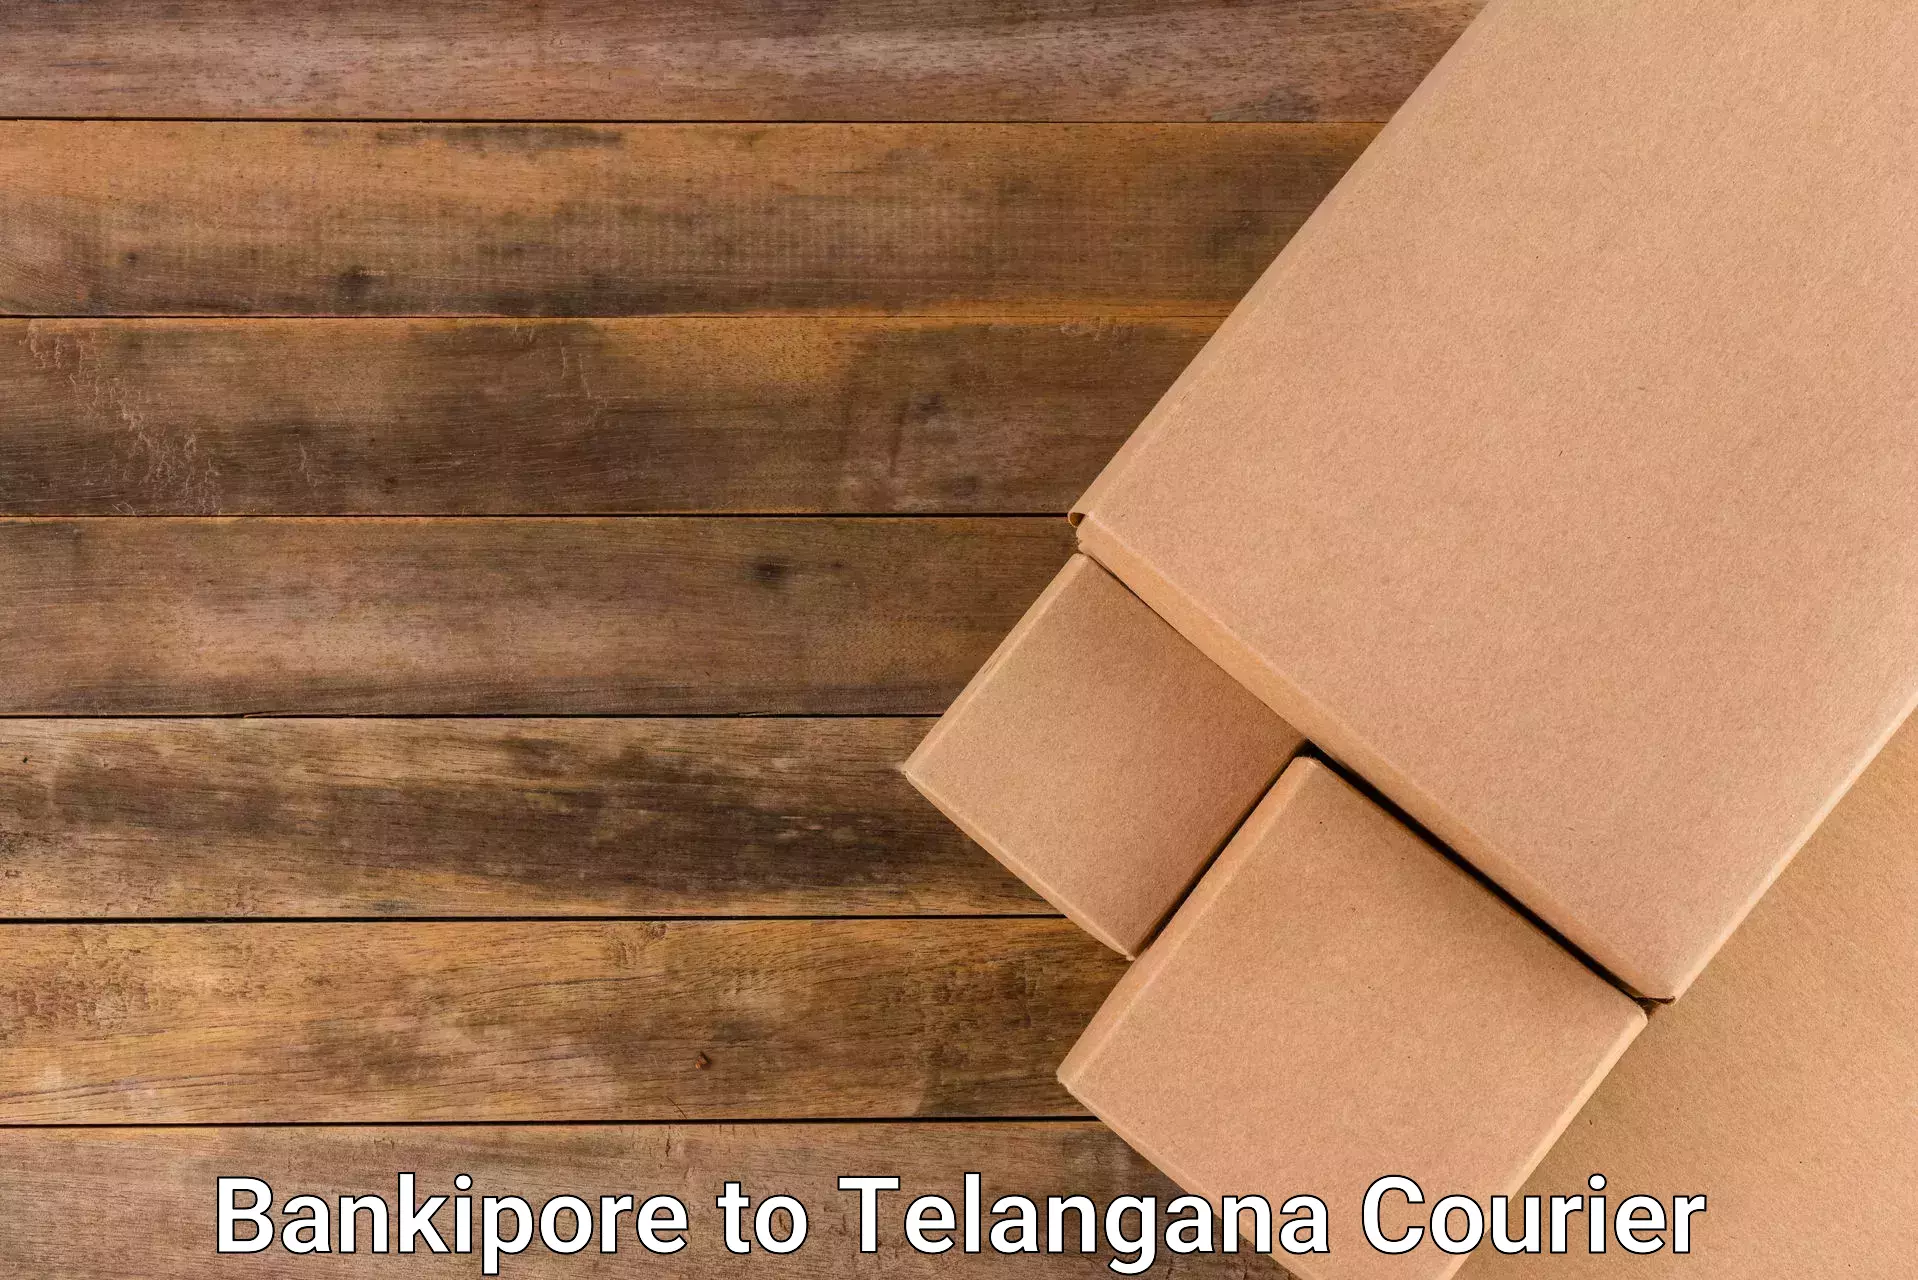 24-hour courier service Bankipore to Bijinapalle